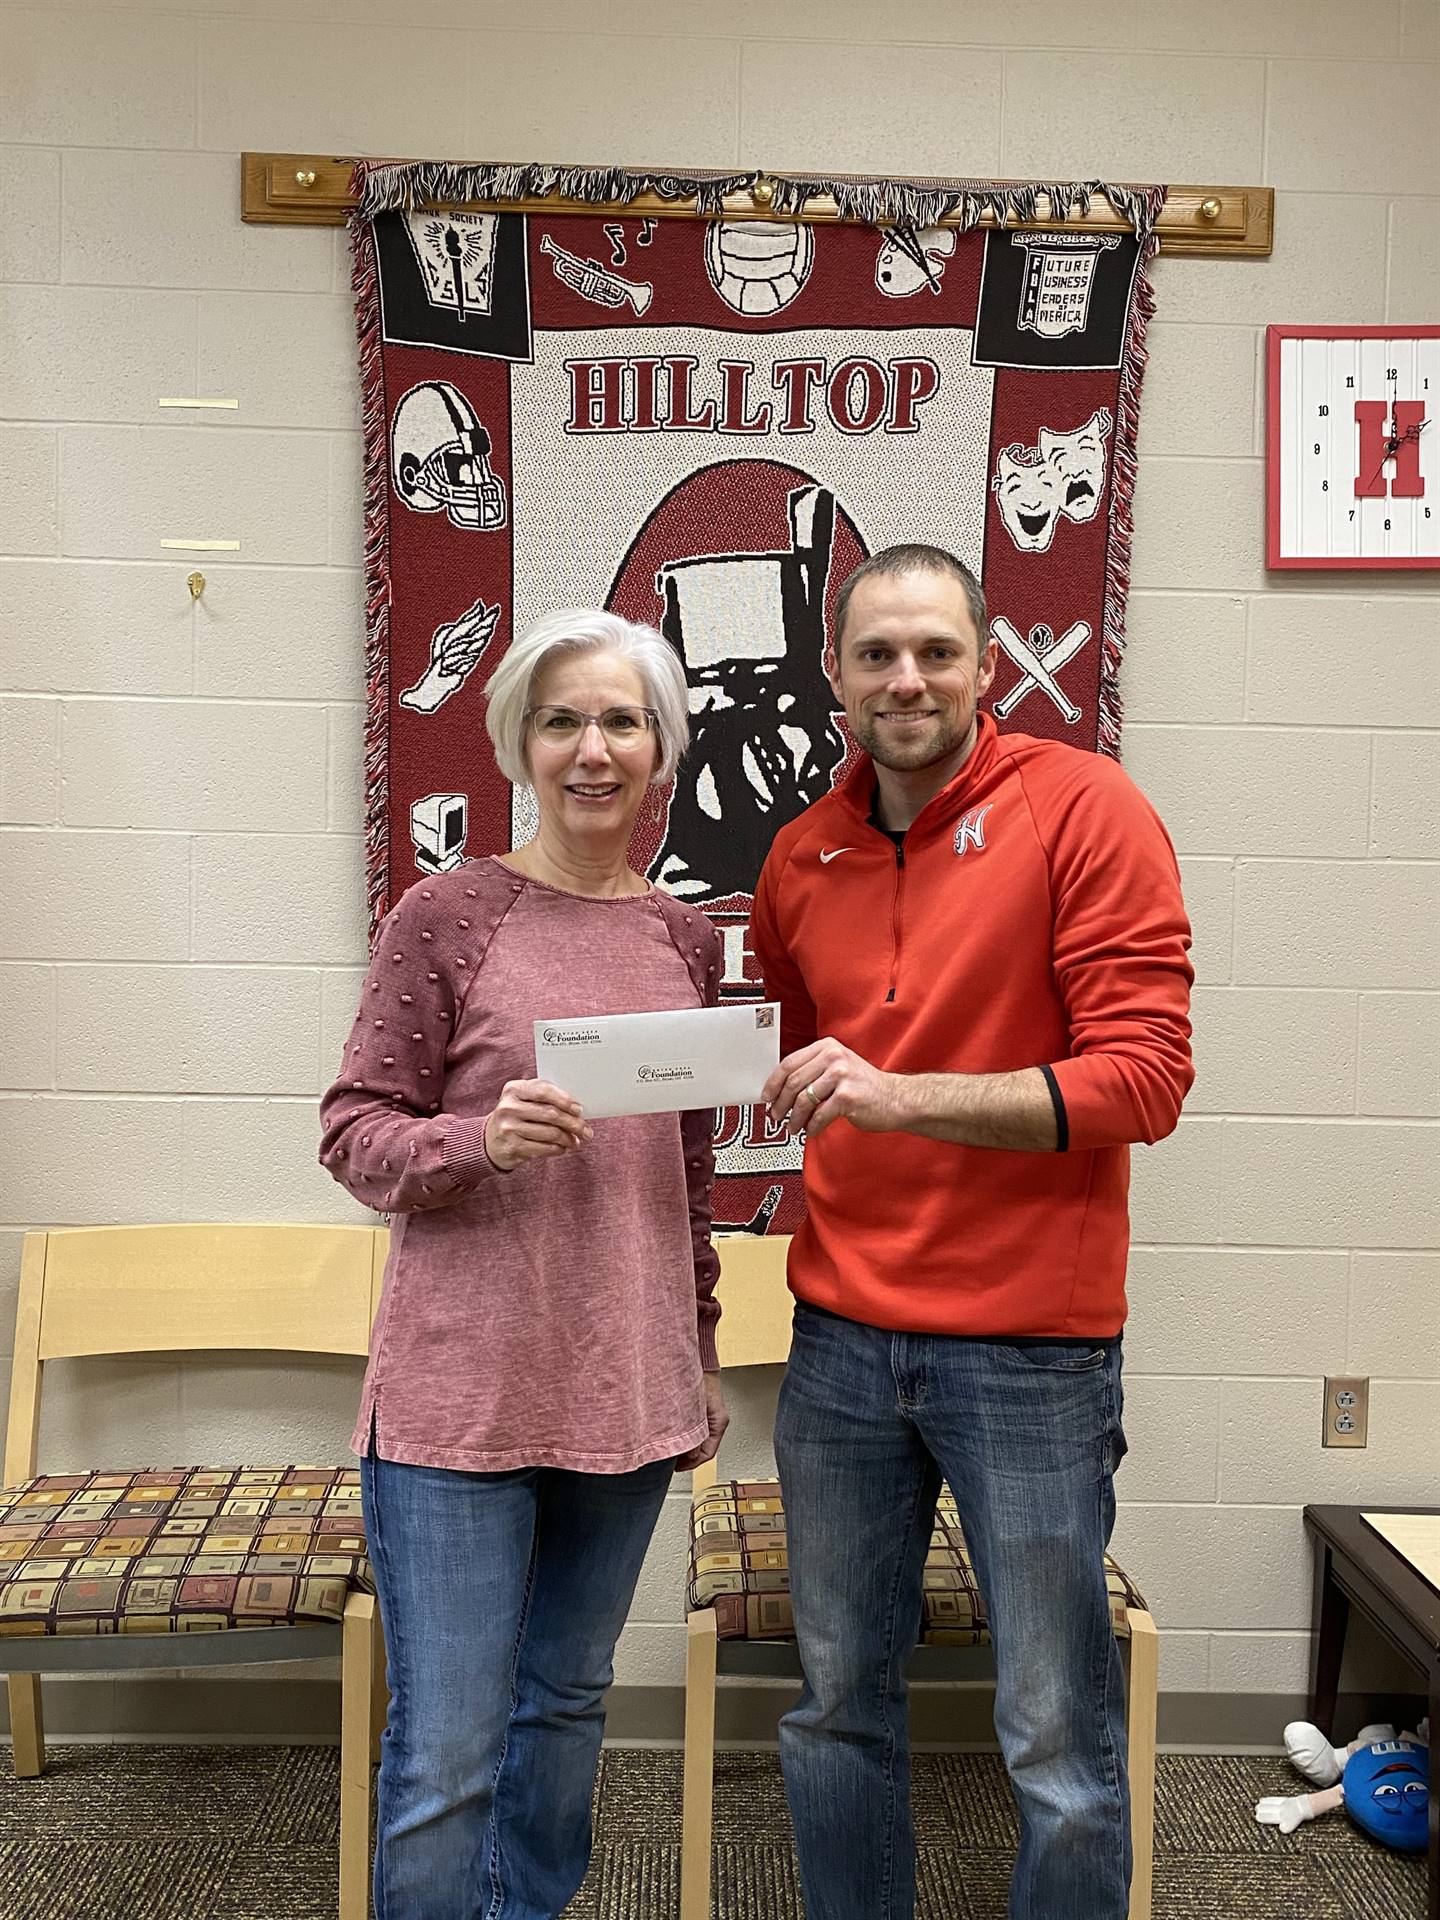 Millcreek-West Unity Area Foundation $2,500 for weight room equipment